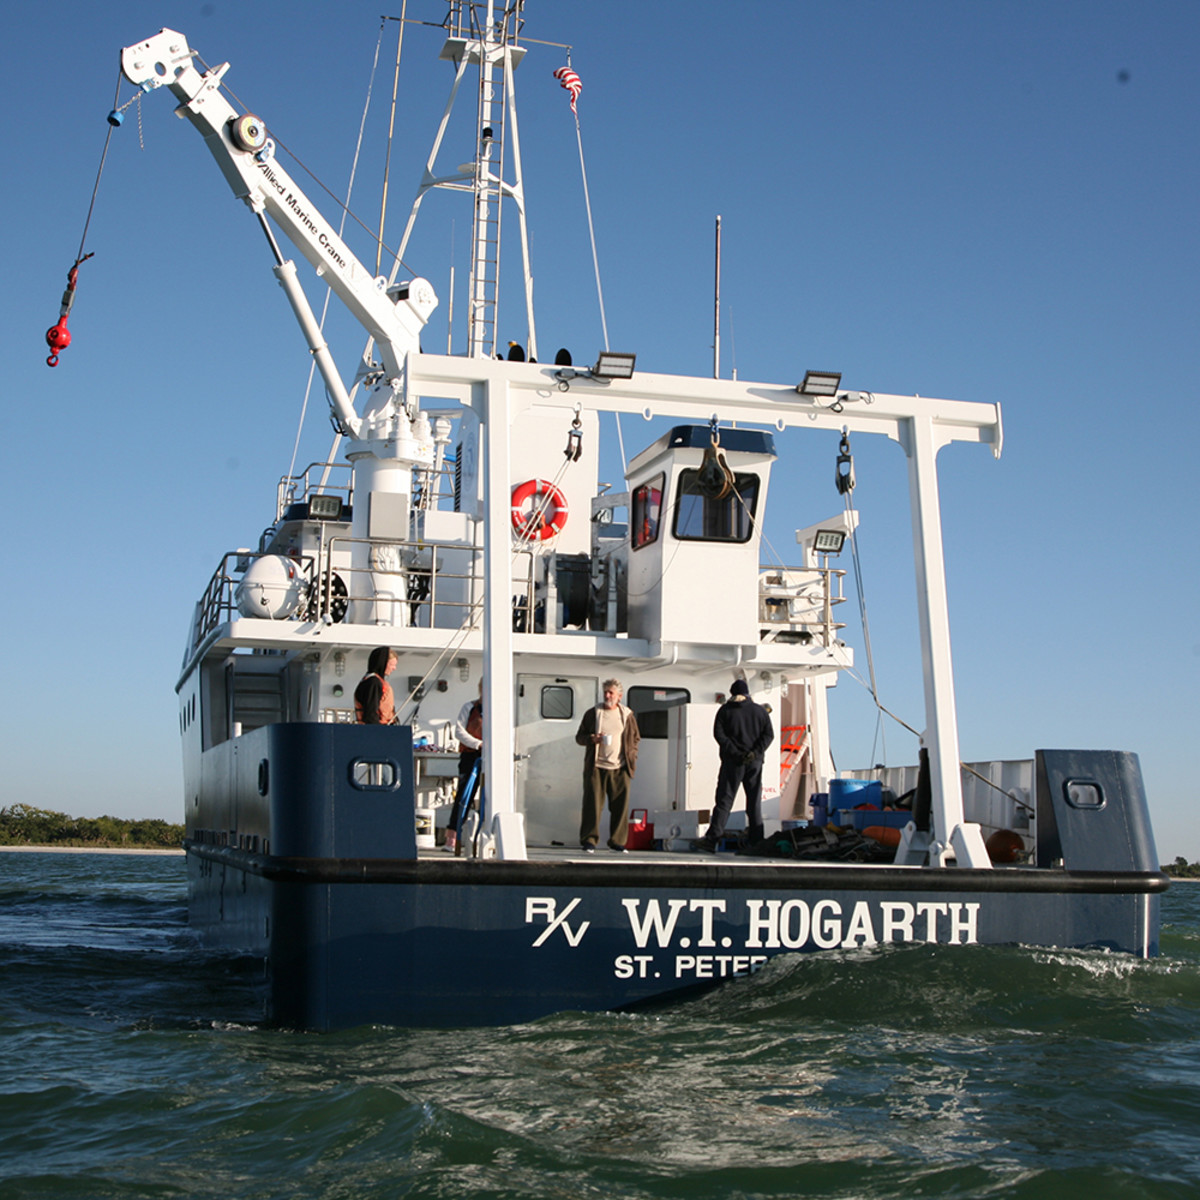 Scientists and students on the aft working deck of the R/V W.T. Hogarth.